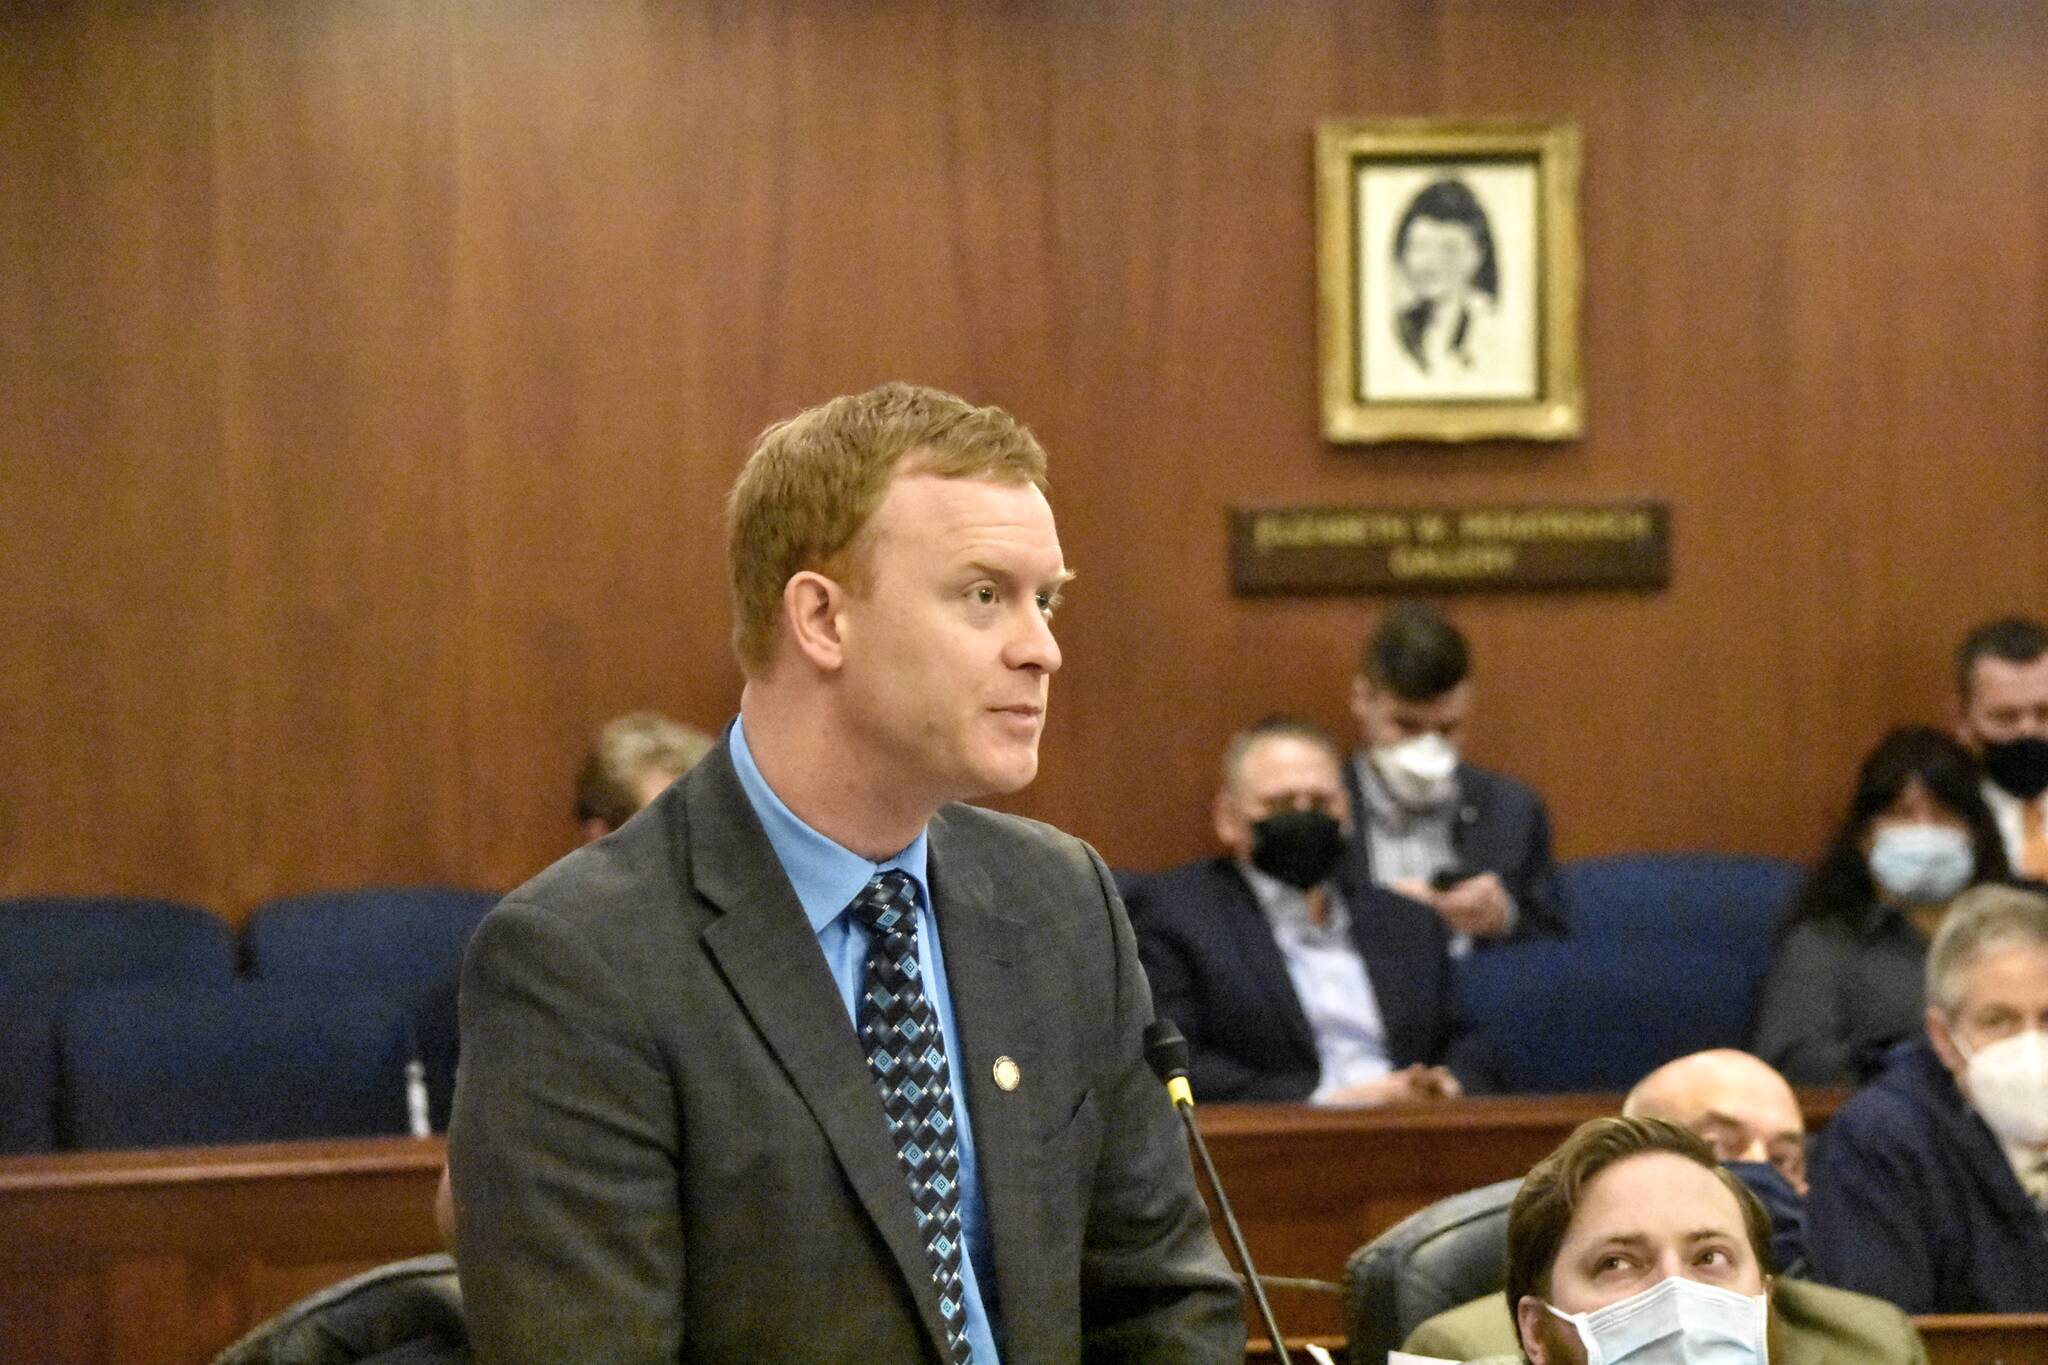 An Alaska judge has ruled that a state lawmaker affiliated with the Oath Keepers, Rep. David Eastman, shown in this February 2022 photo, may stay on the general election ballot in November even though he’s likely ineligible to hold public office (Peter Segall / Juneau Empire File)